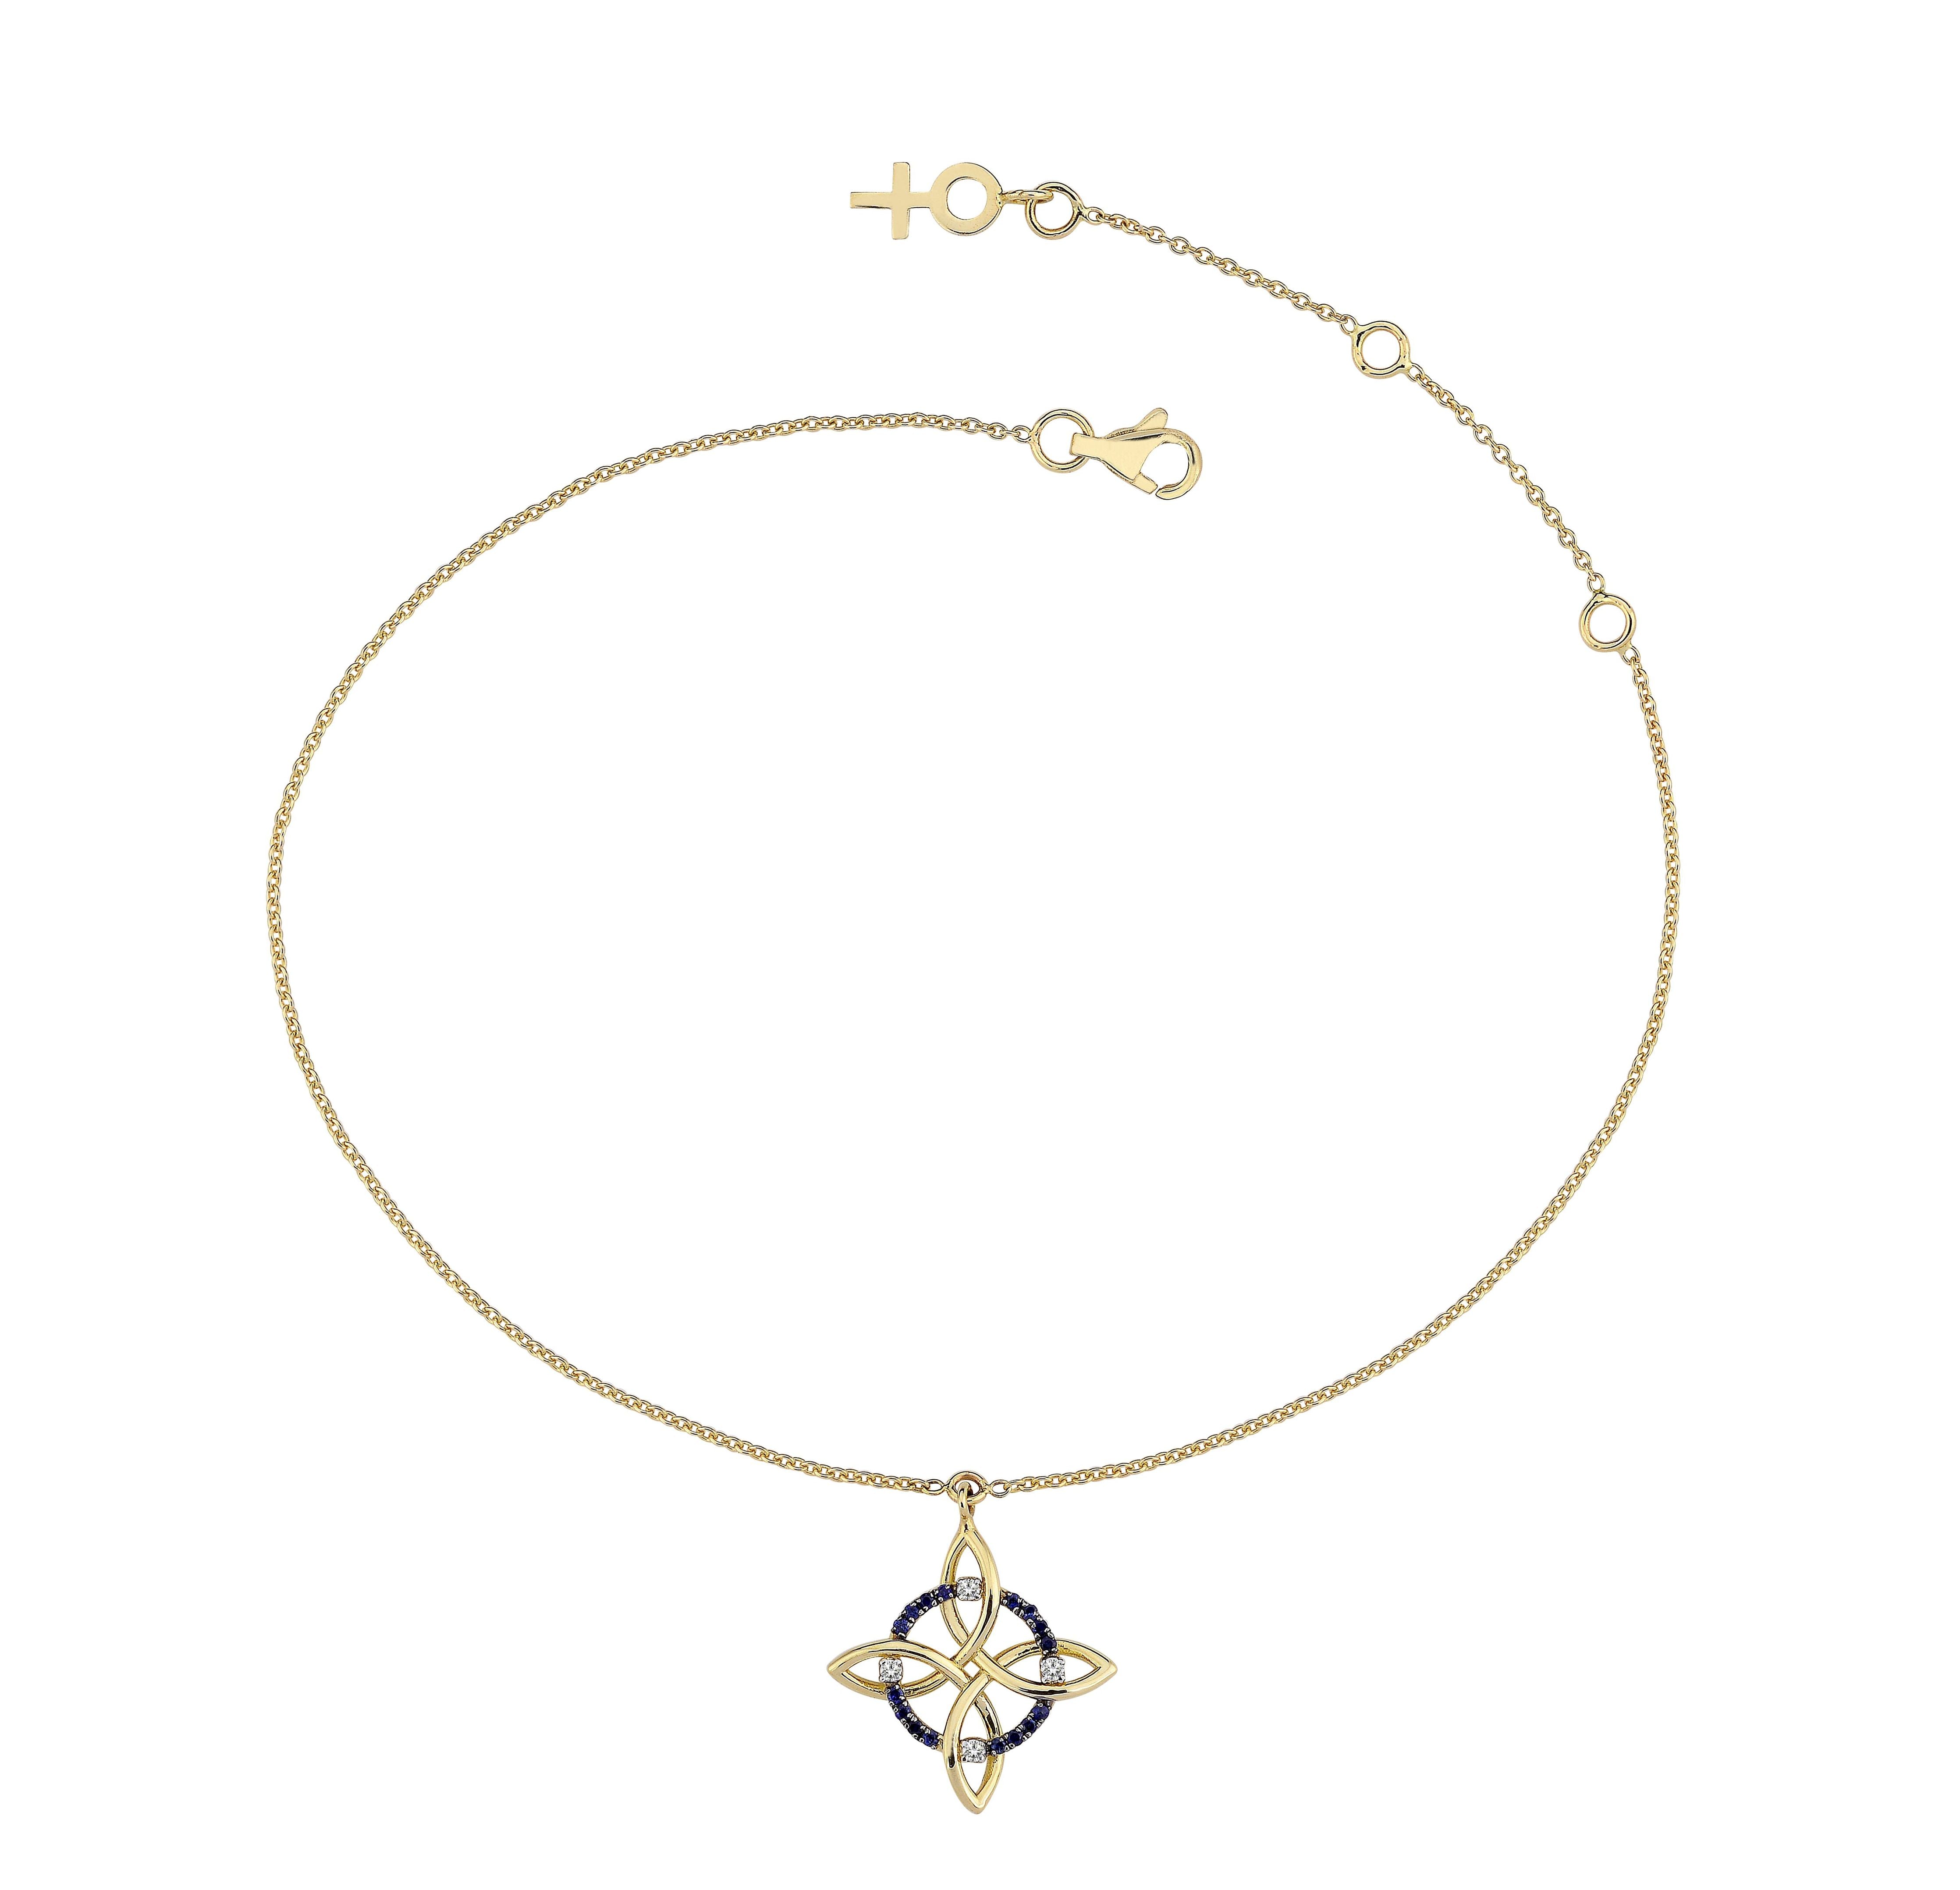 Magic Knot Anklet in Yellow Gold - Her Story Shop